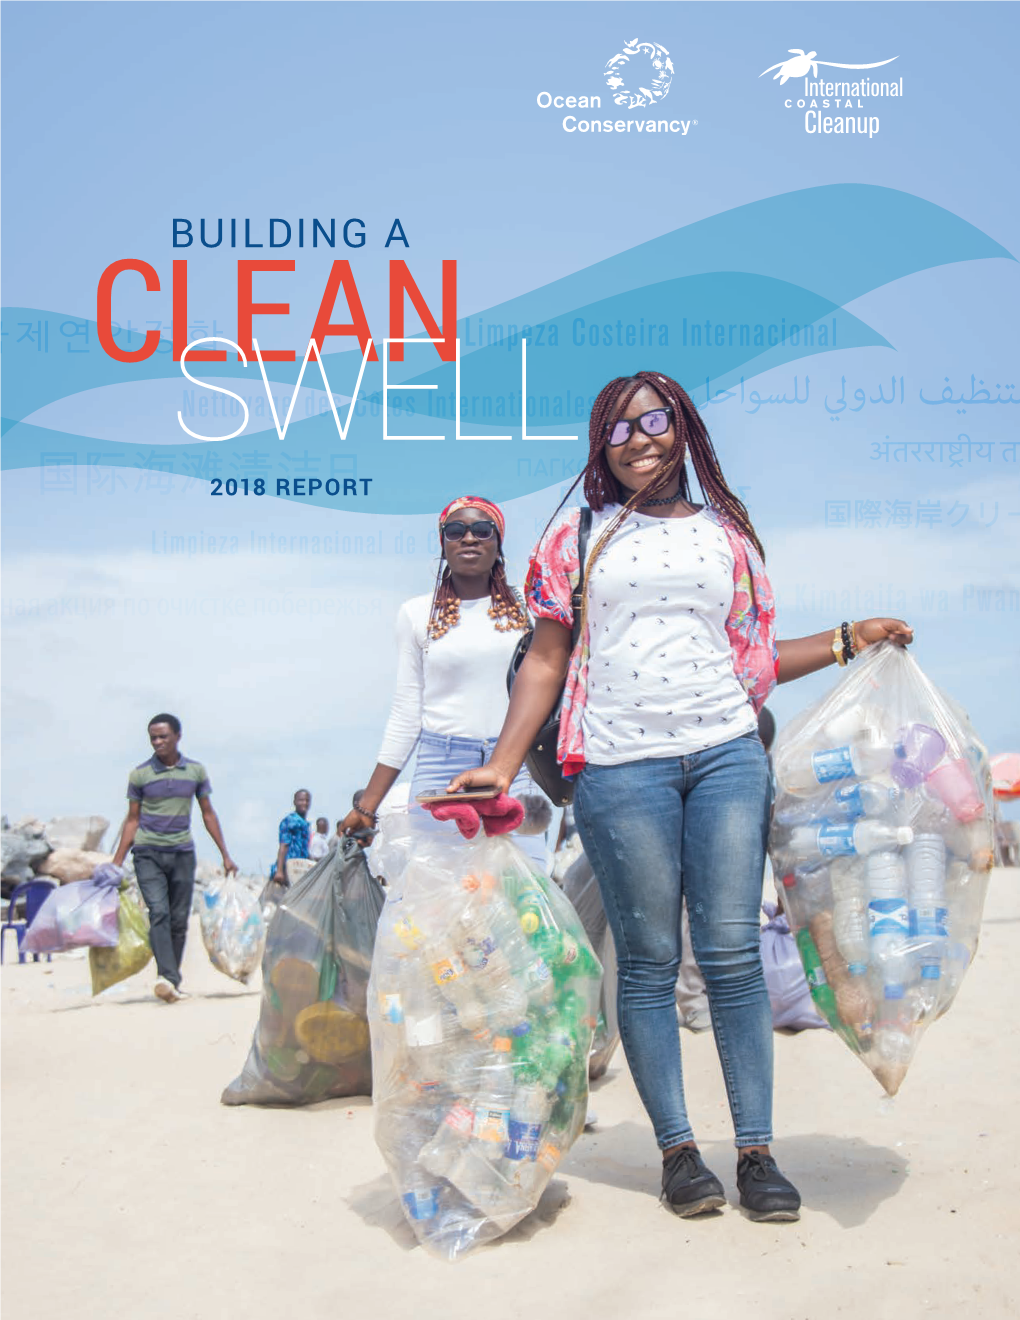 International Coastal Cleanup Mobilizes Individuals to Have an Immediate and Tangible Impact on the Health of Our Ocean